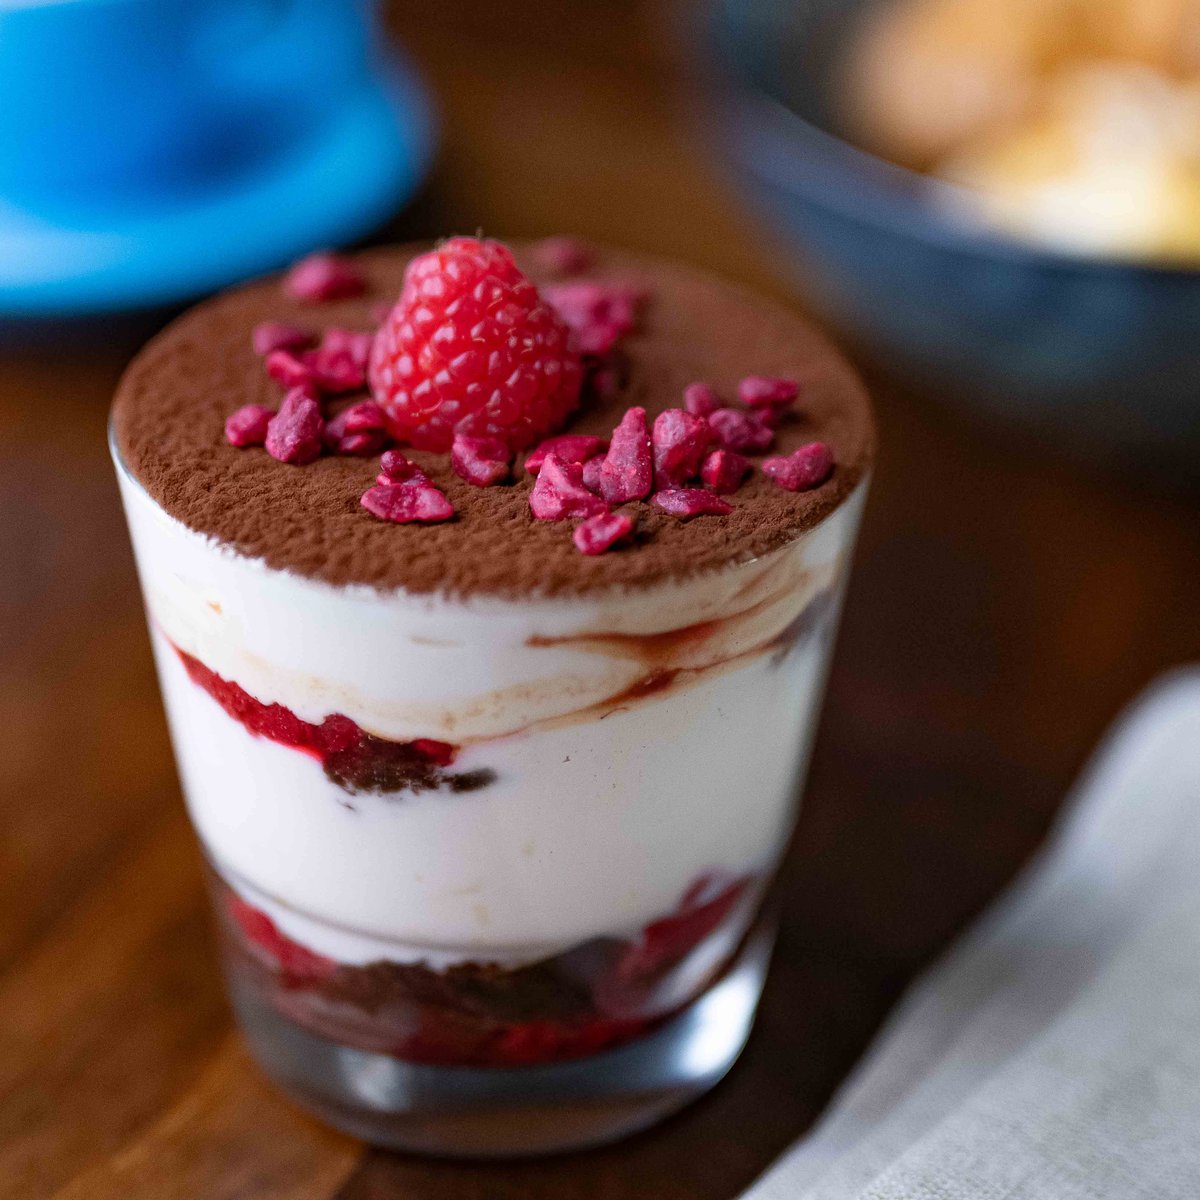 Our sweets menu is a treat for all! 🤩
Do you prefer a starter or pudding? Let us know in the comments! ⤵️

#sweettreats #visitcambridge #thelittlerose #cambridgeuk #publife #cambridgeeats #pudding #pubfood #dogfriendlypubs